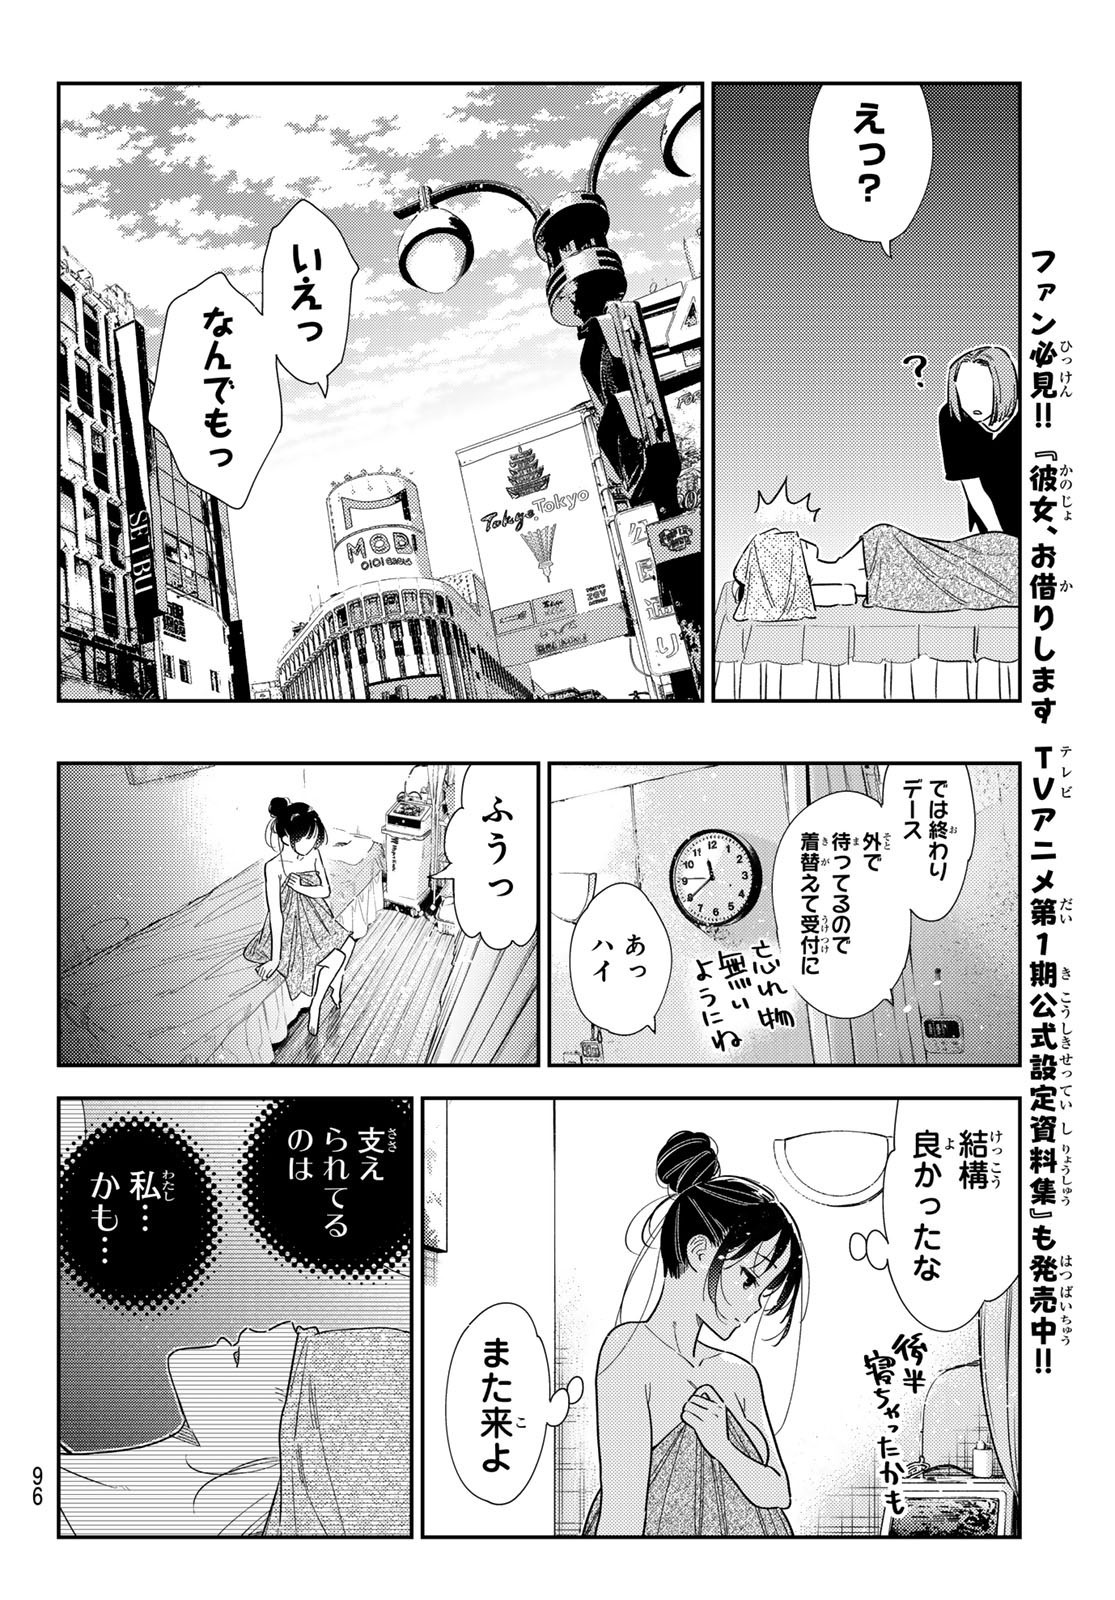 Weekly Shōnen Magazine - 週刊少年マガジン - Chapter 2024-24 - Page 96